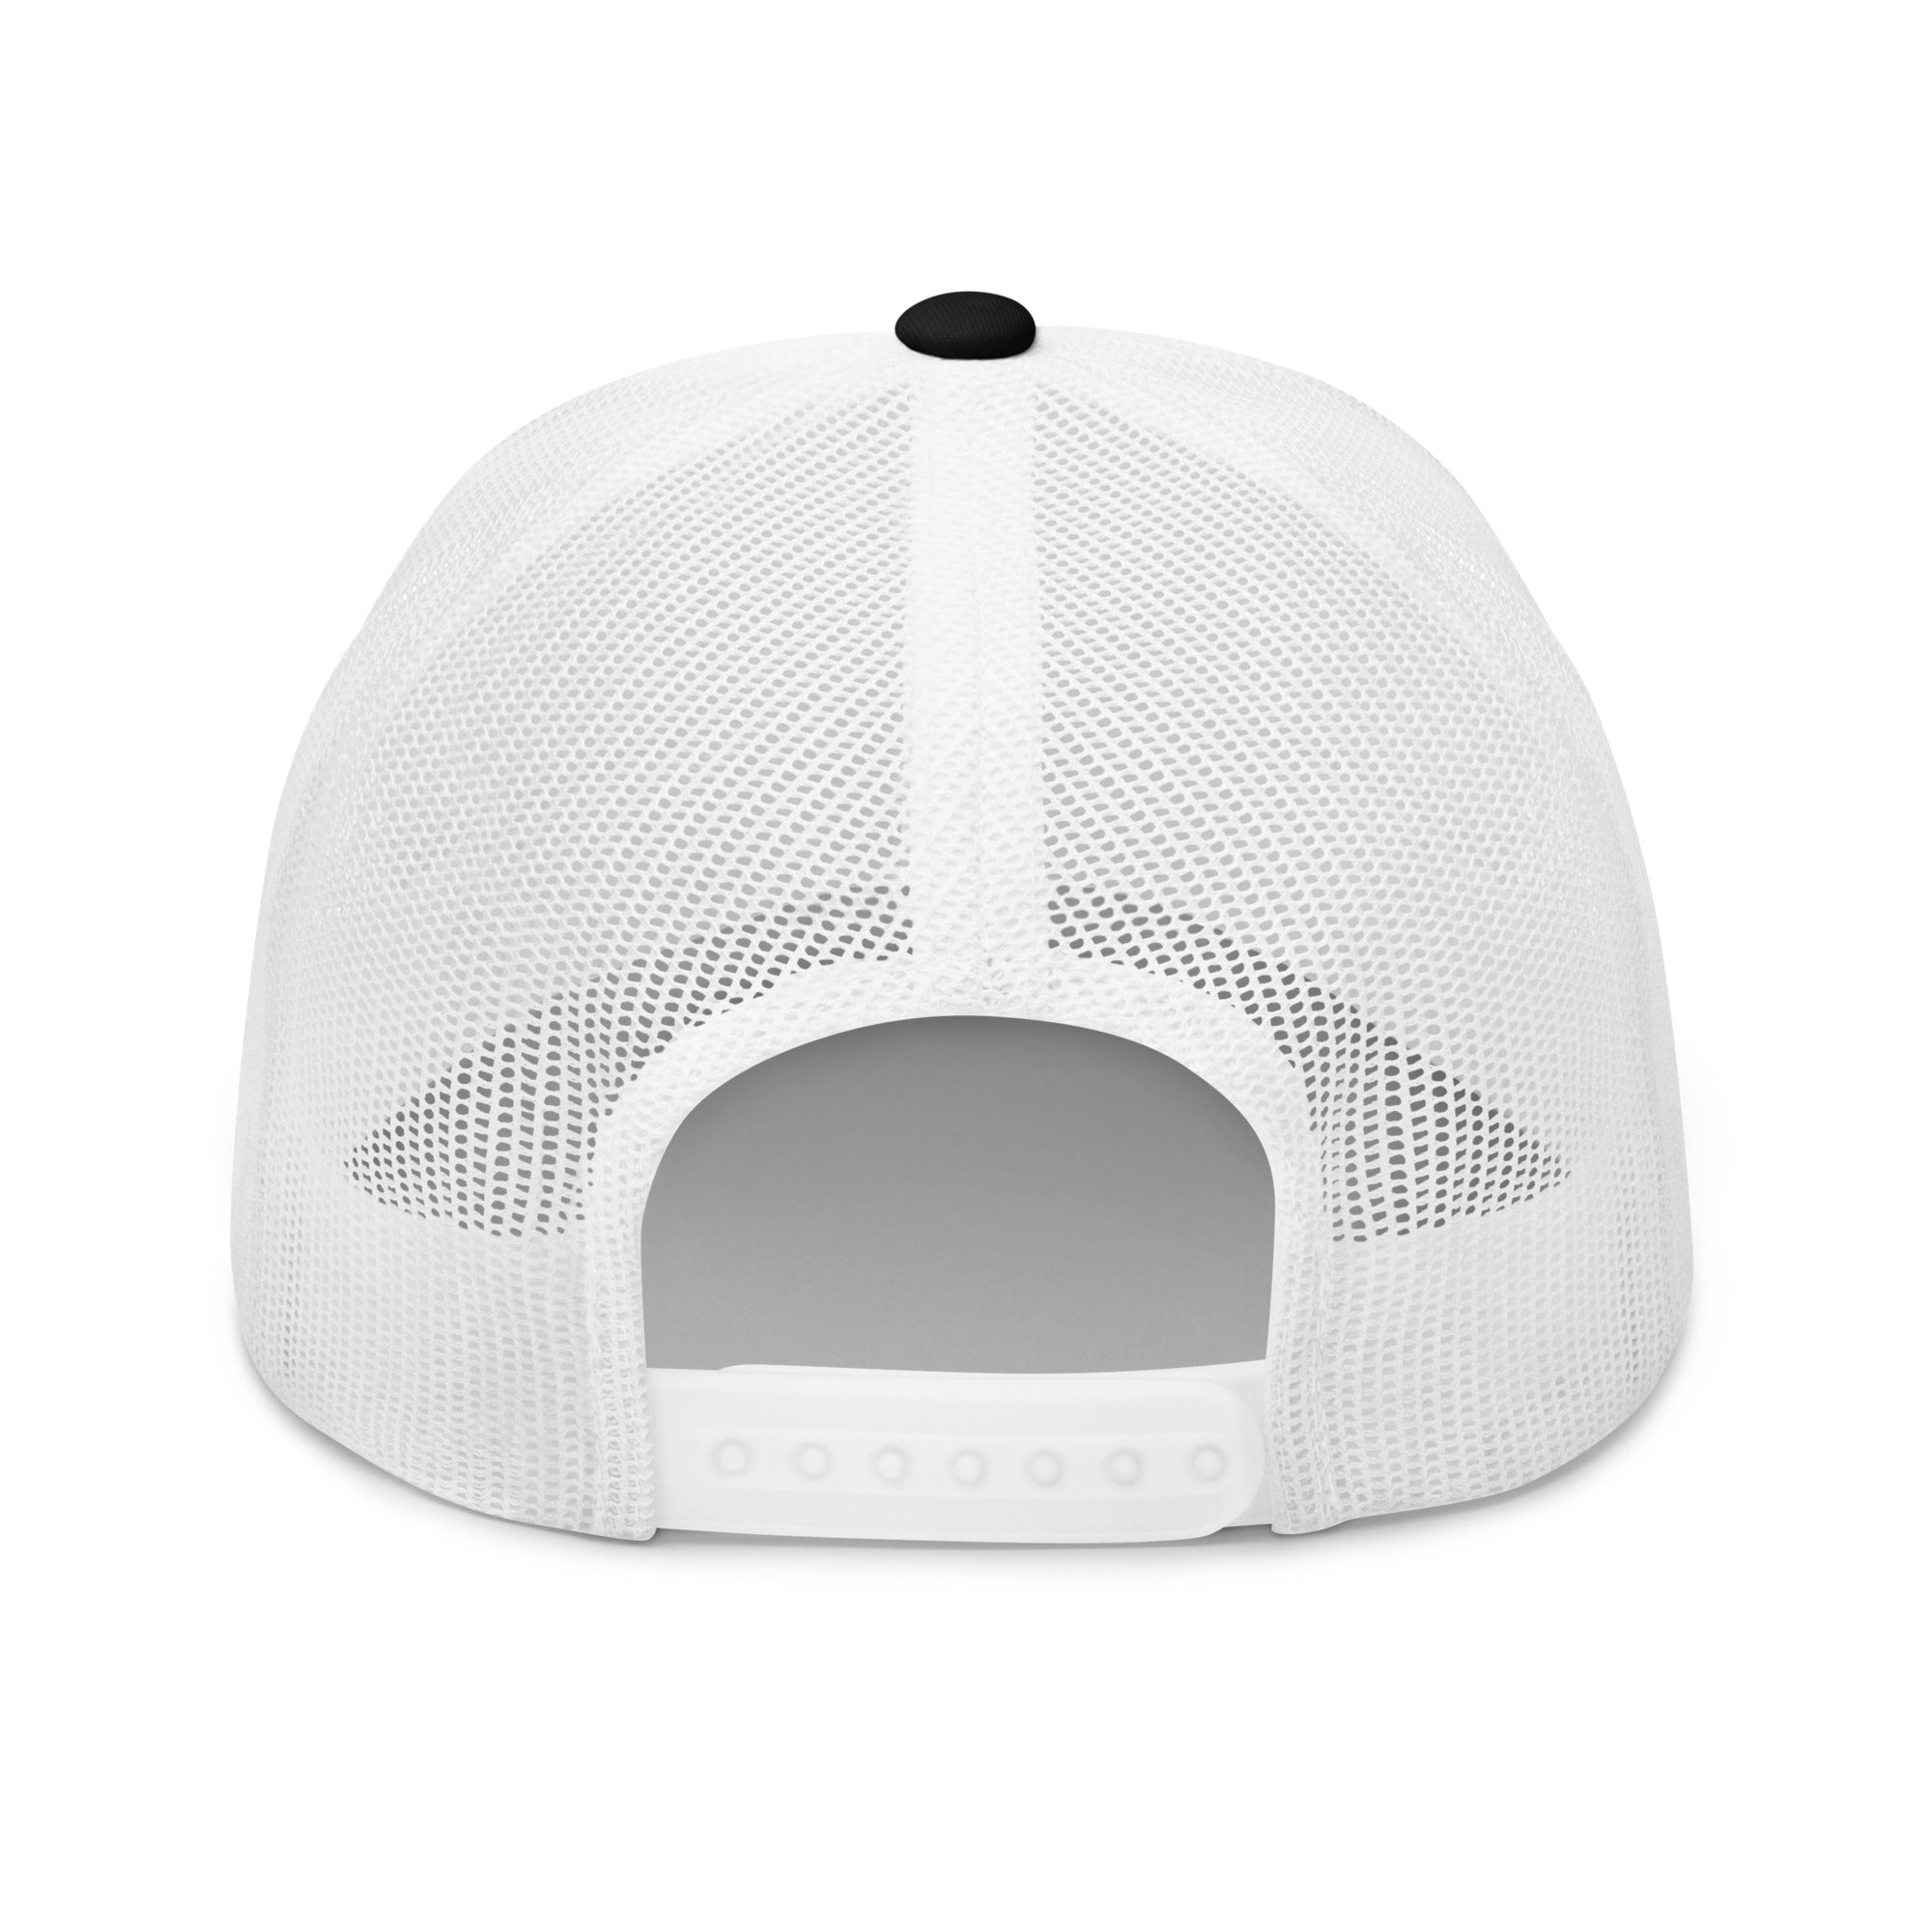 Bitcoin Accessories - The Satoshi Trucker Hat has mesh back panels and a snapback closure. Color: Black and White. Back view.